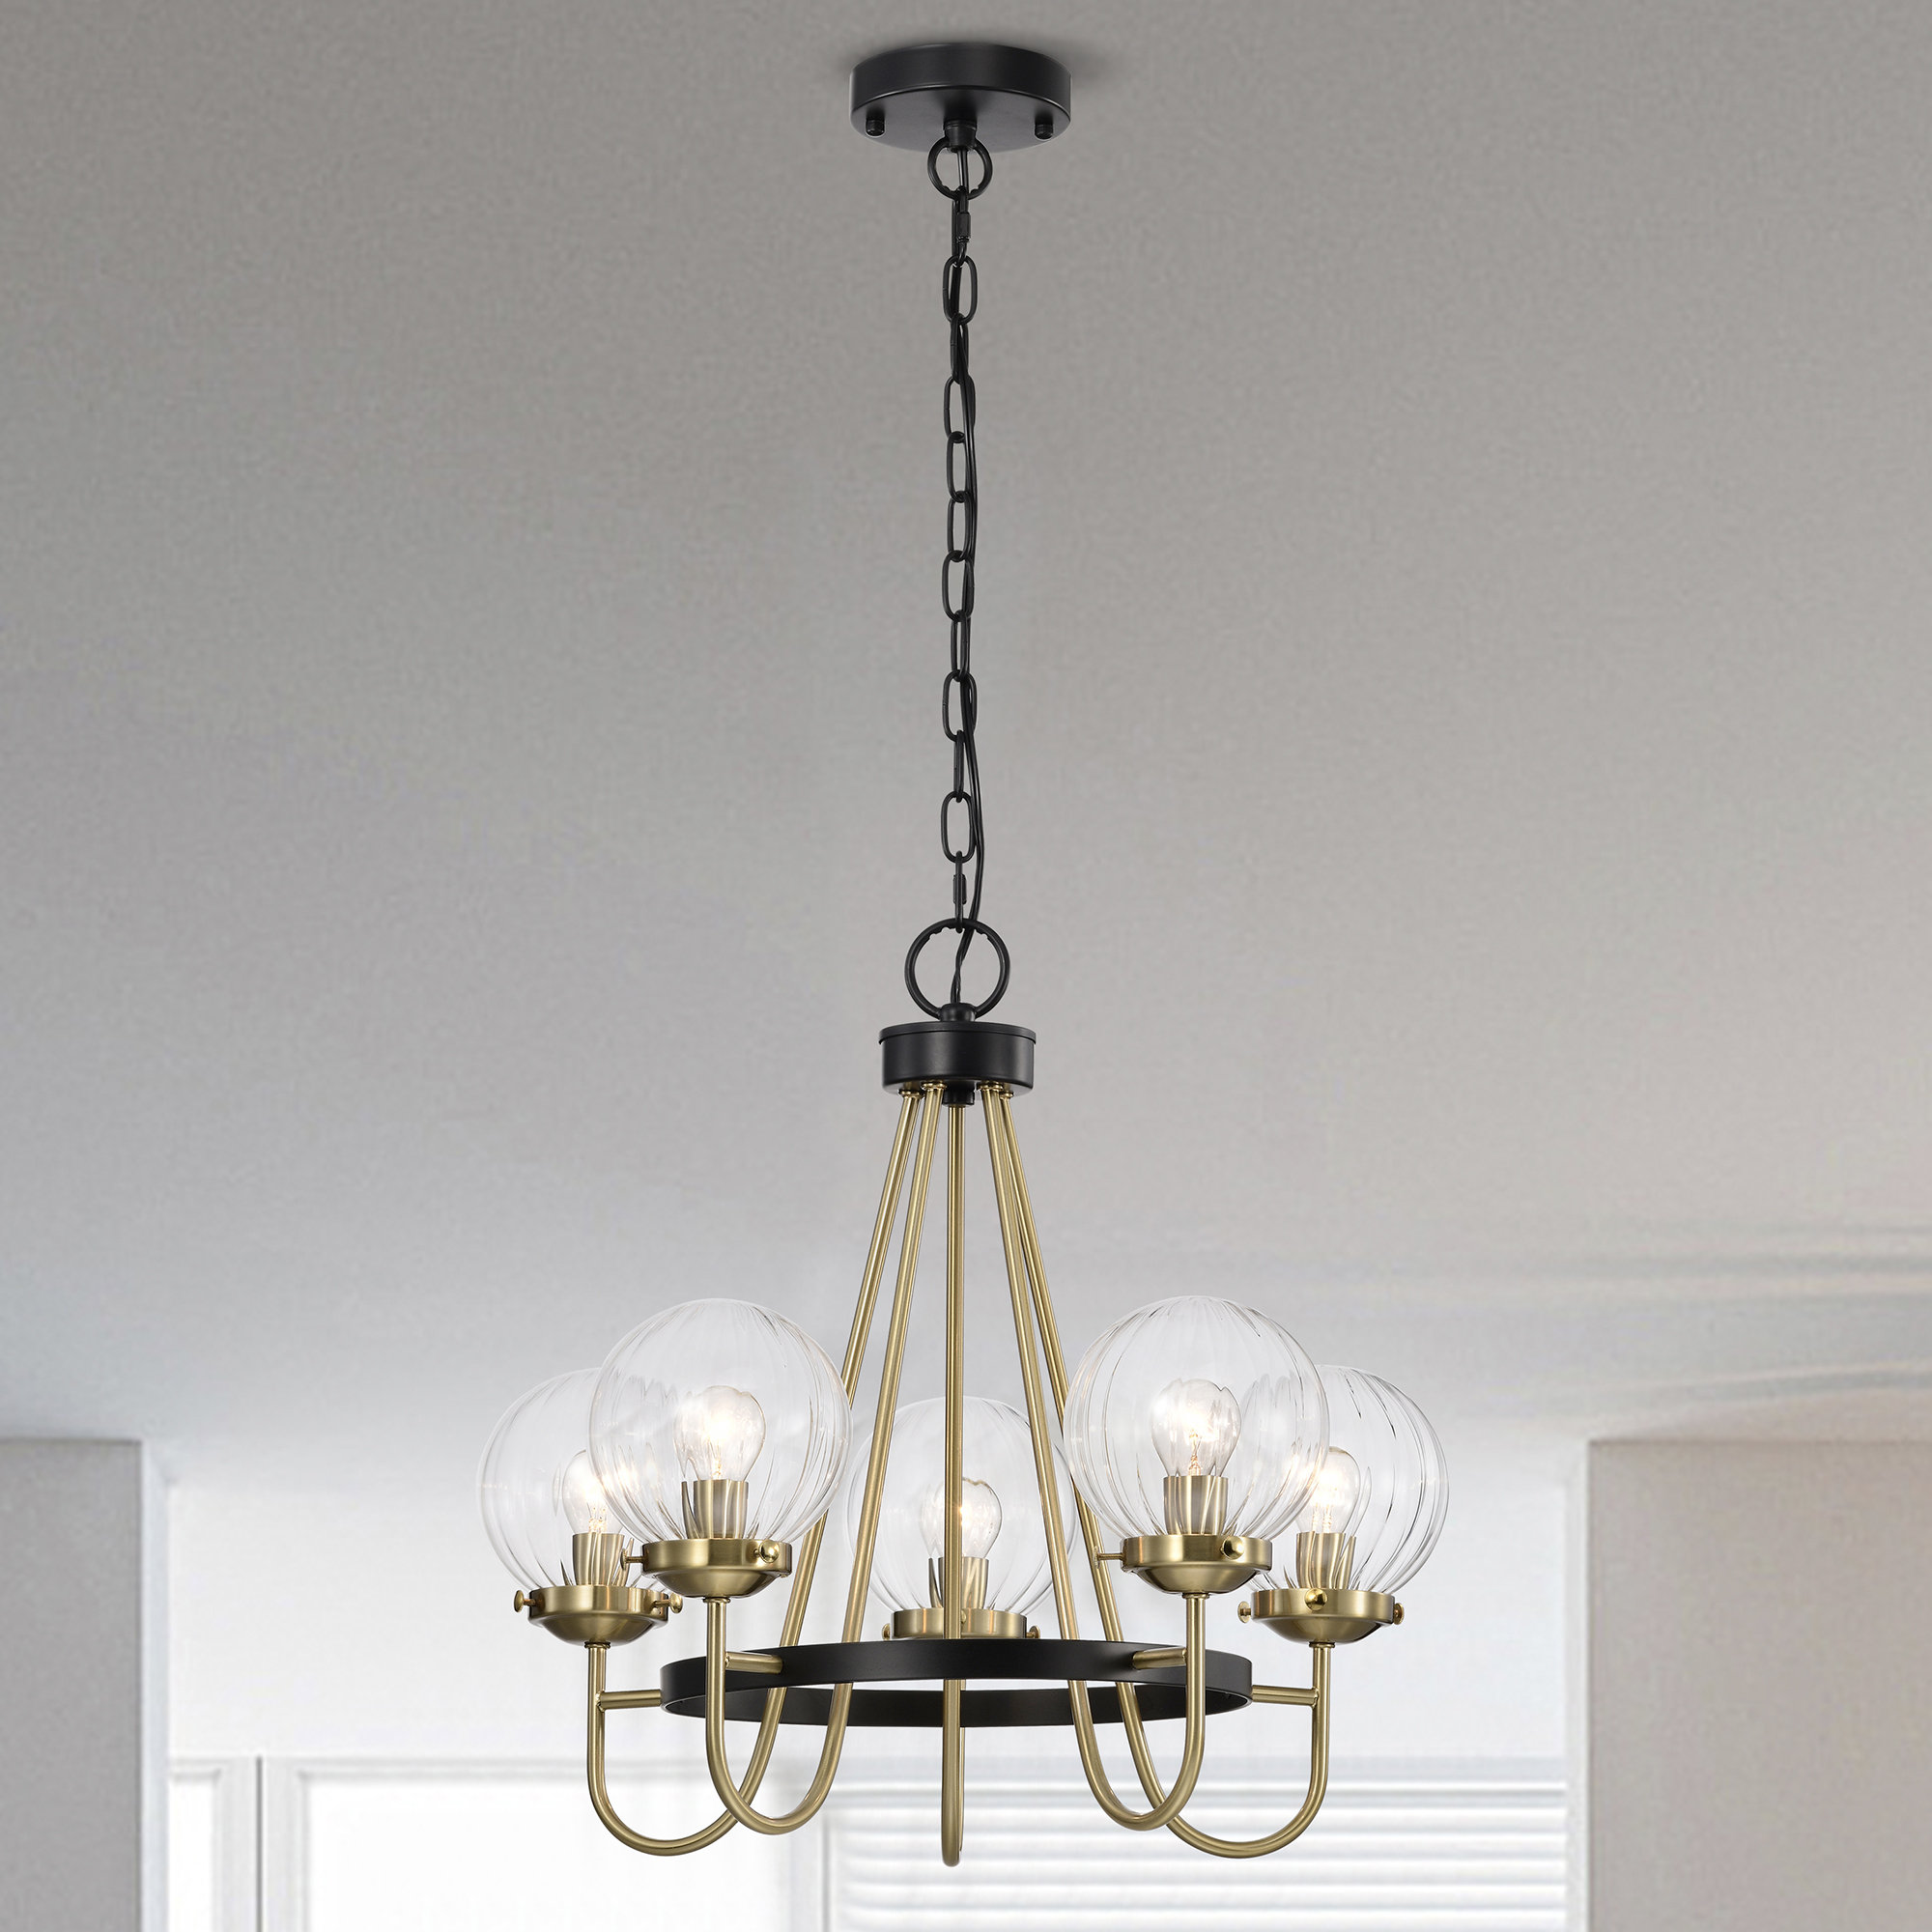 Ines 20.4 in. 5-Light Indoor Matte black and Brass Finish Chandelier with Light Kit